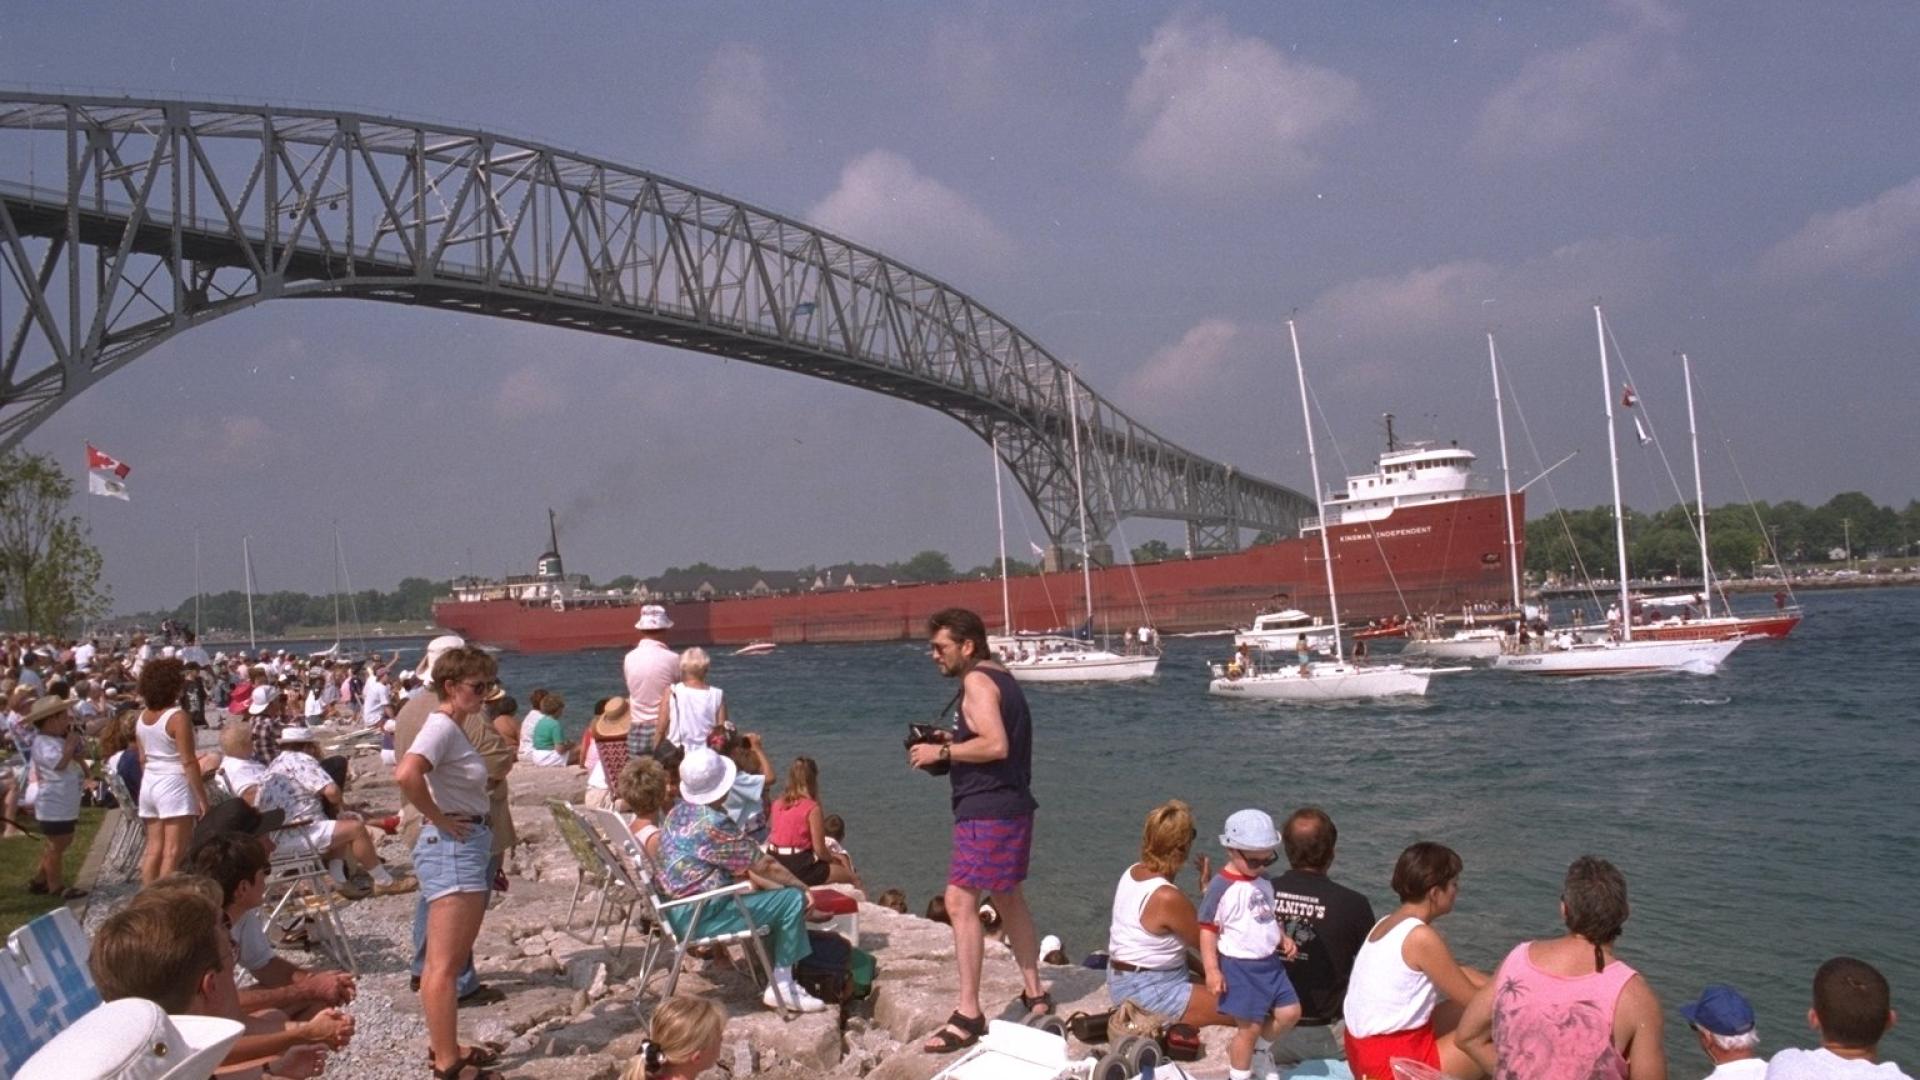 People sitting by the shore as a cargo ship goes under the bridge.